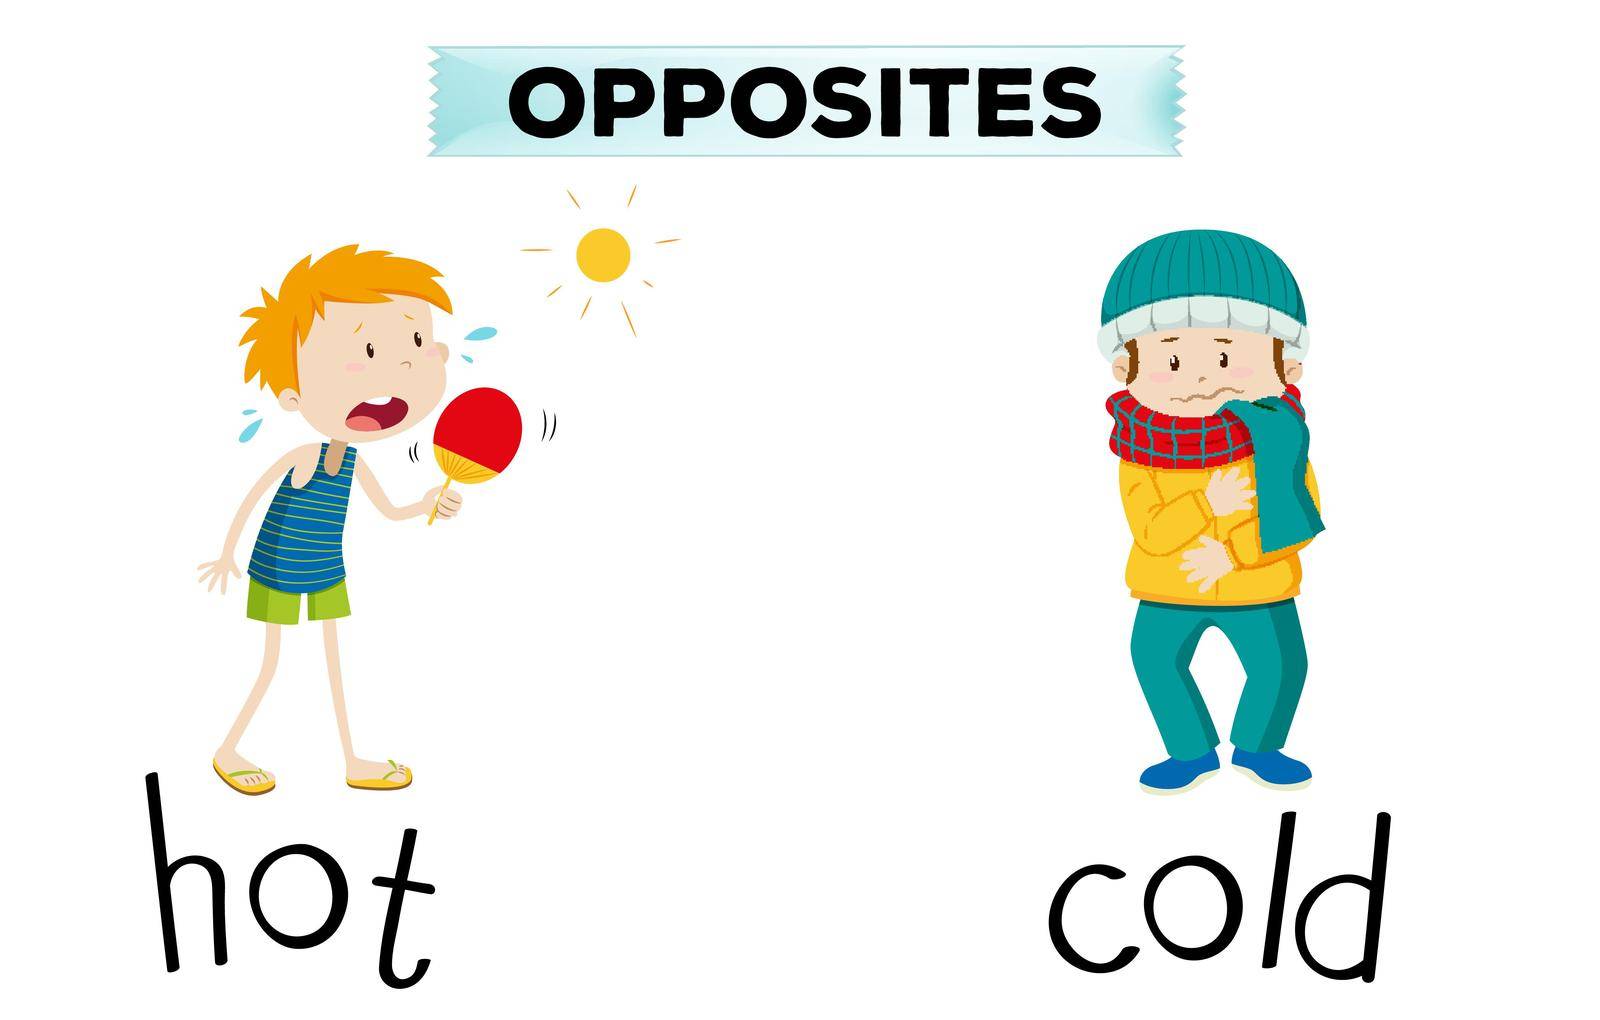 Opposite words for hot and cold illustration